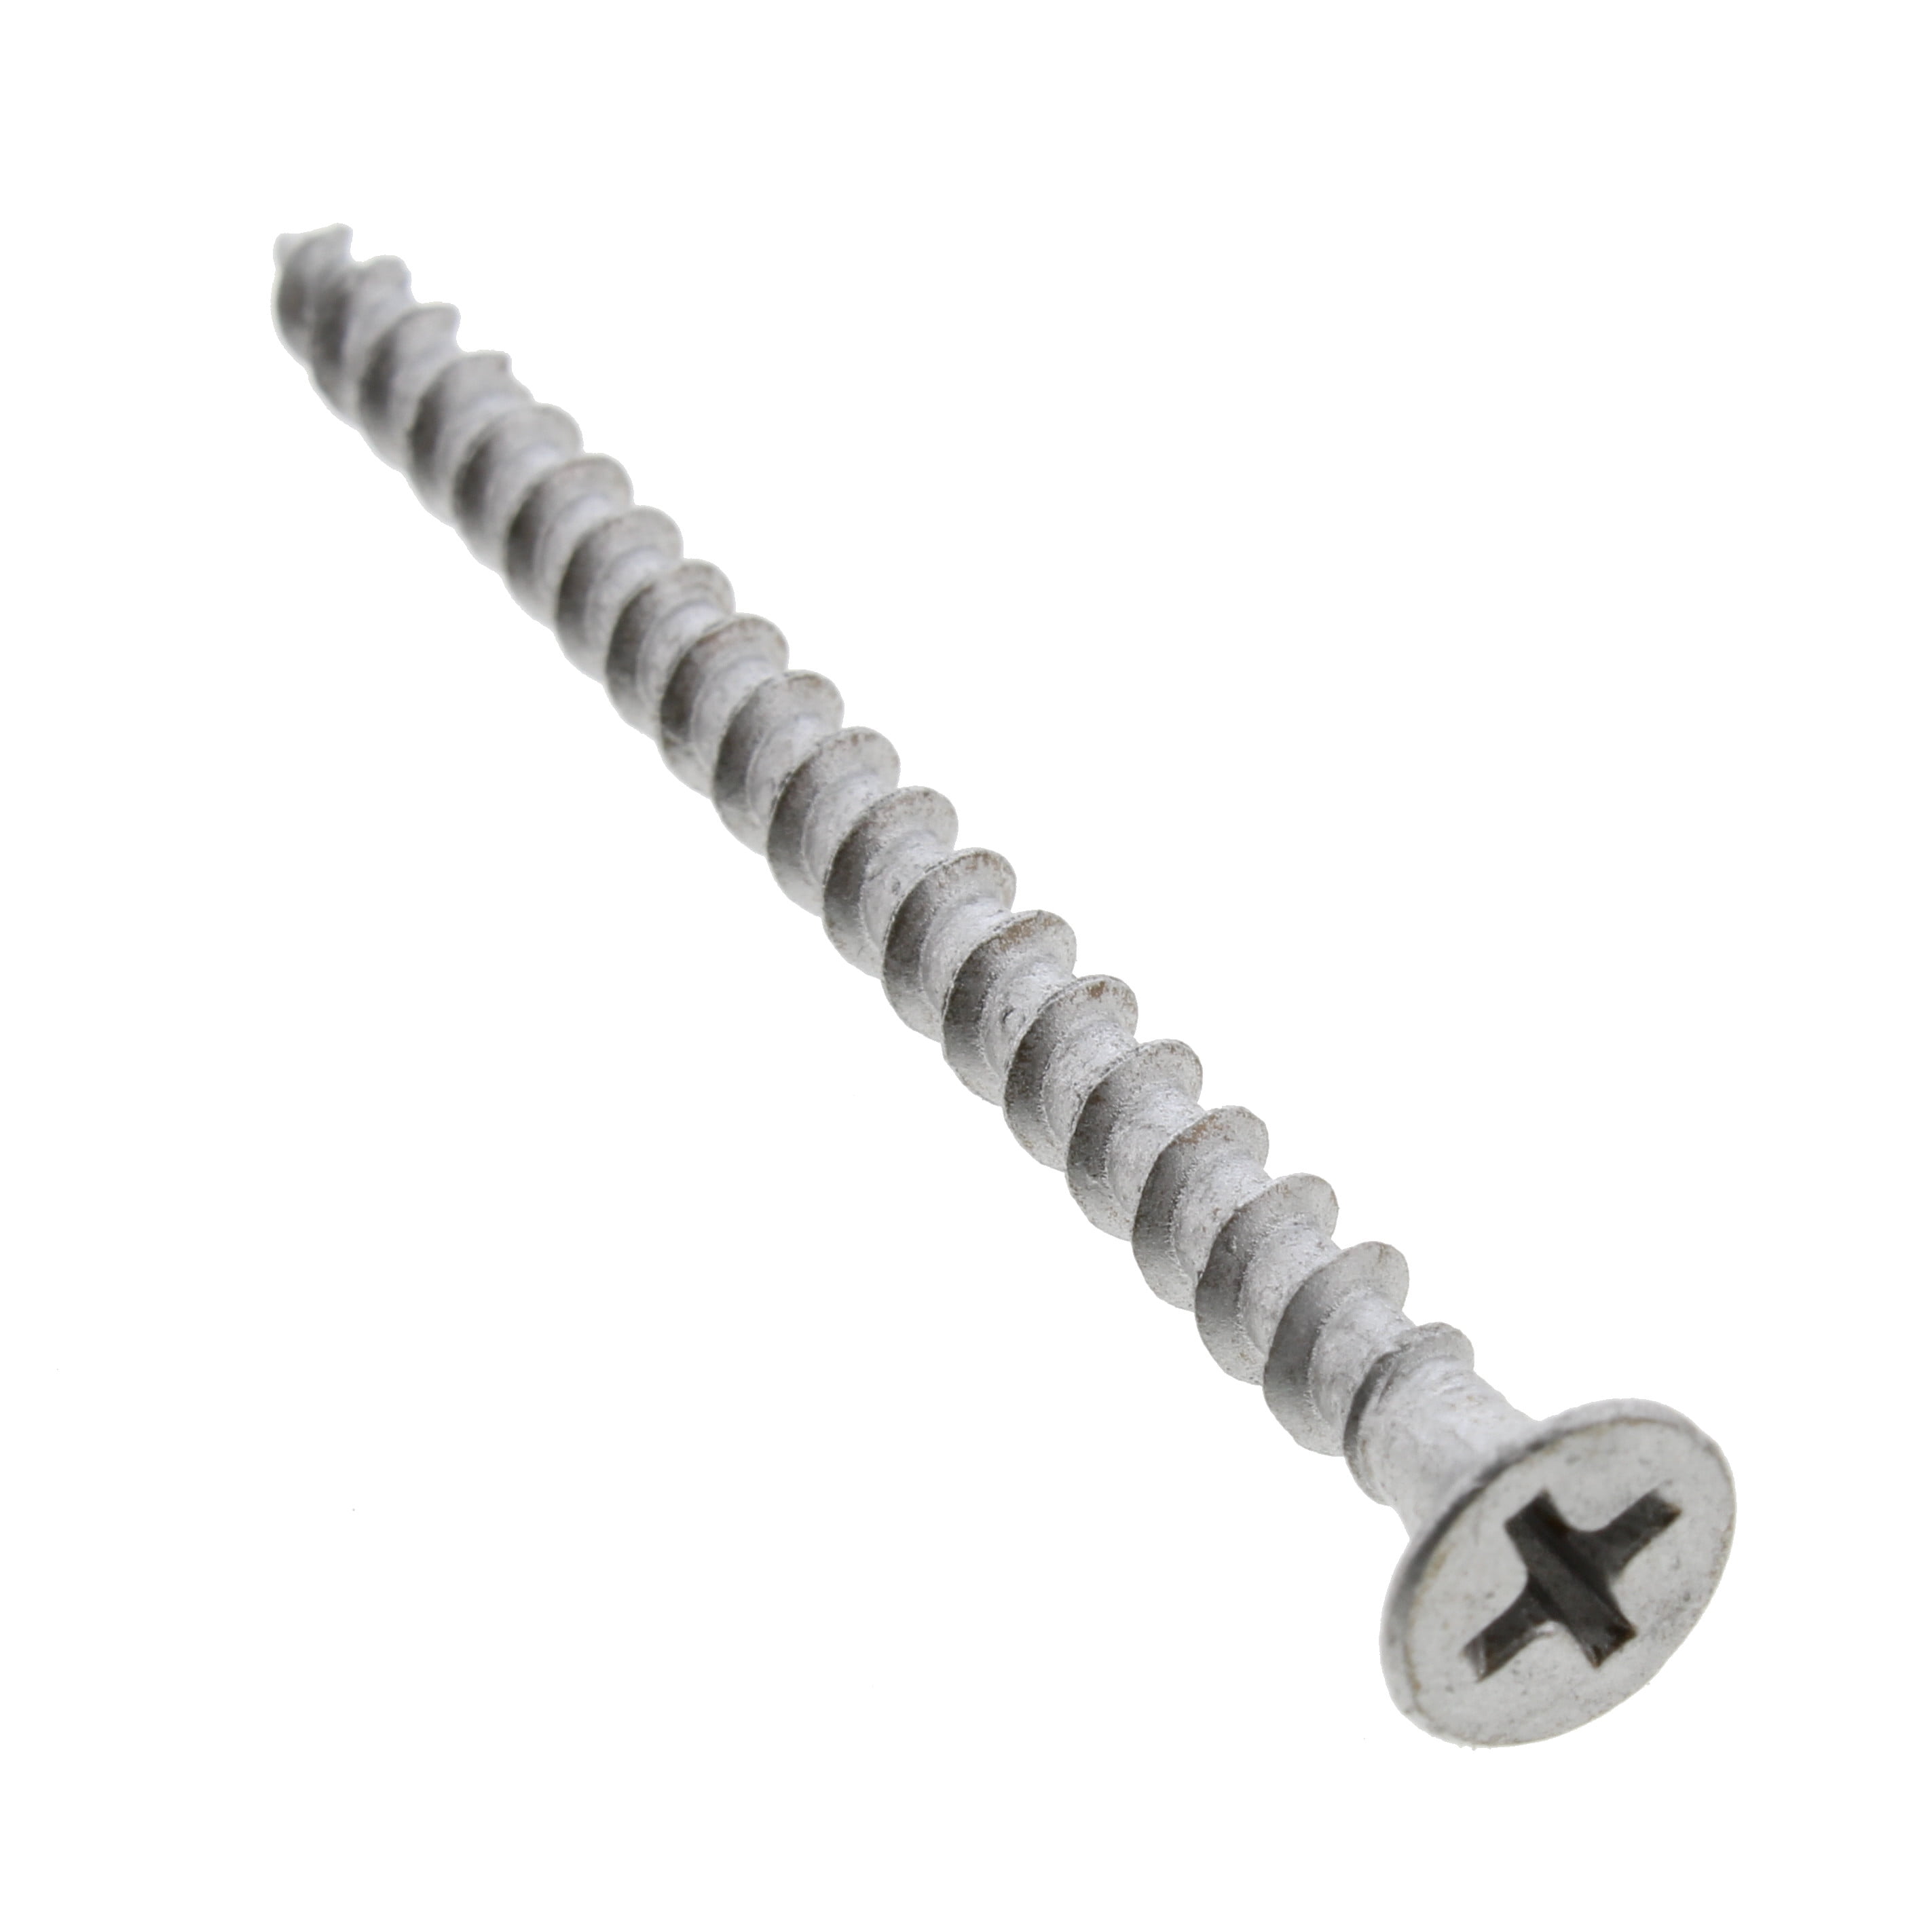 Stainless Steel Wood Screws #12 x 3 Solid Brass Flat Head Slotted Wood Screw 50 Pcs Quality Metal Fast